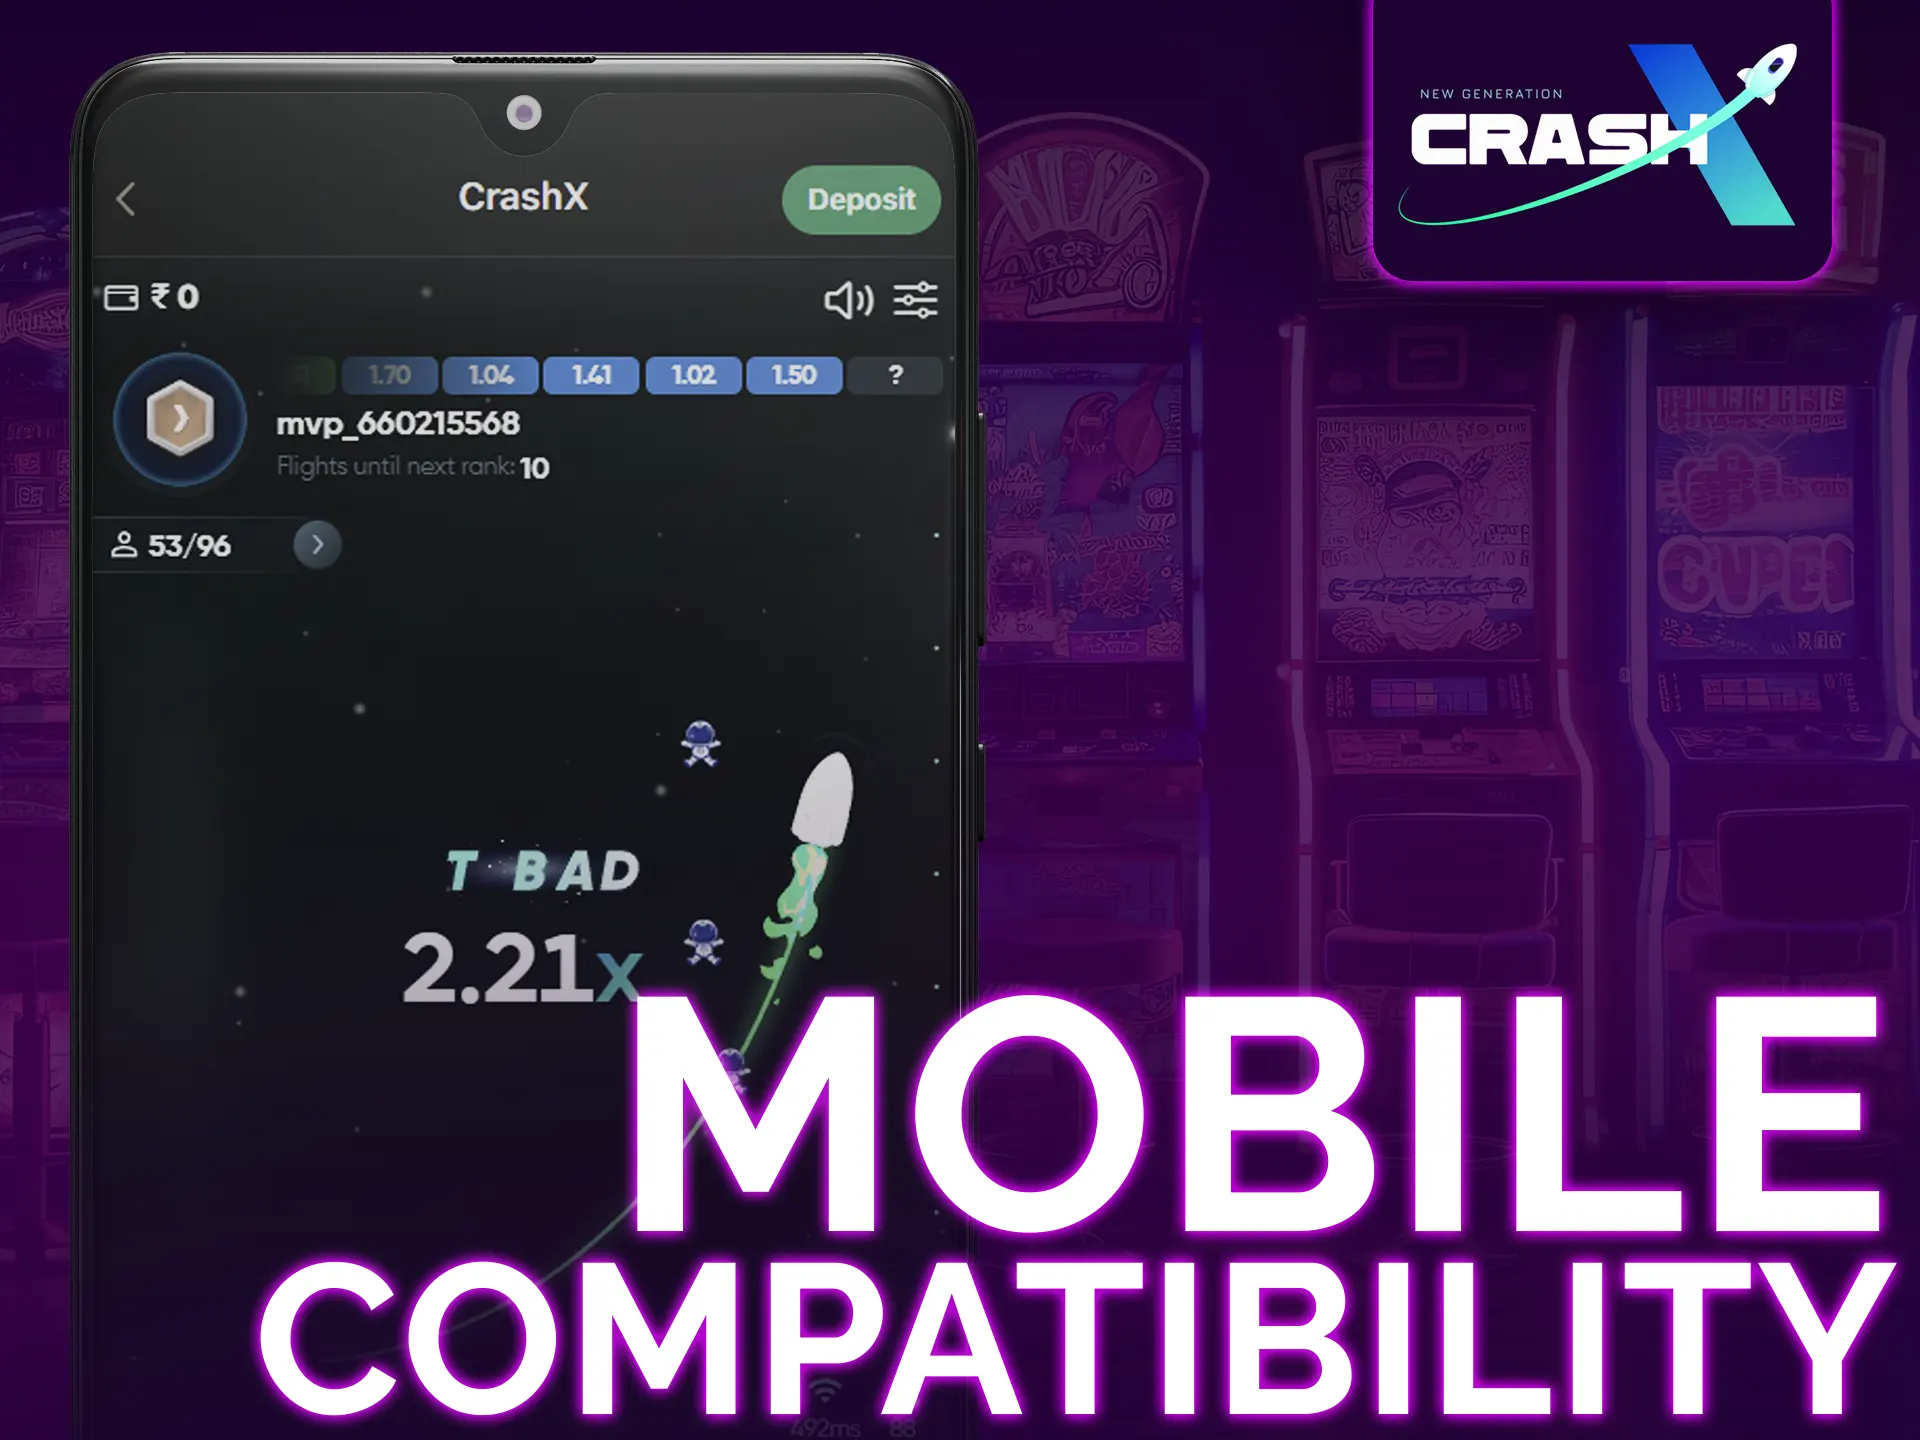 Enjoy Crash X on mobile devices with ease.